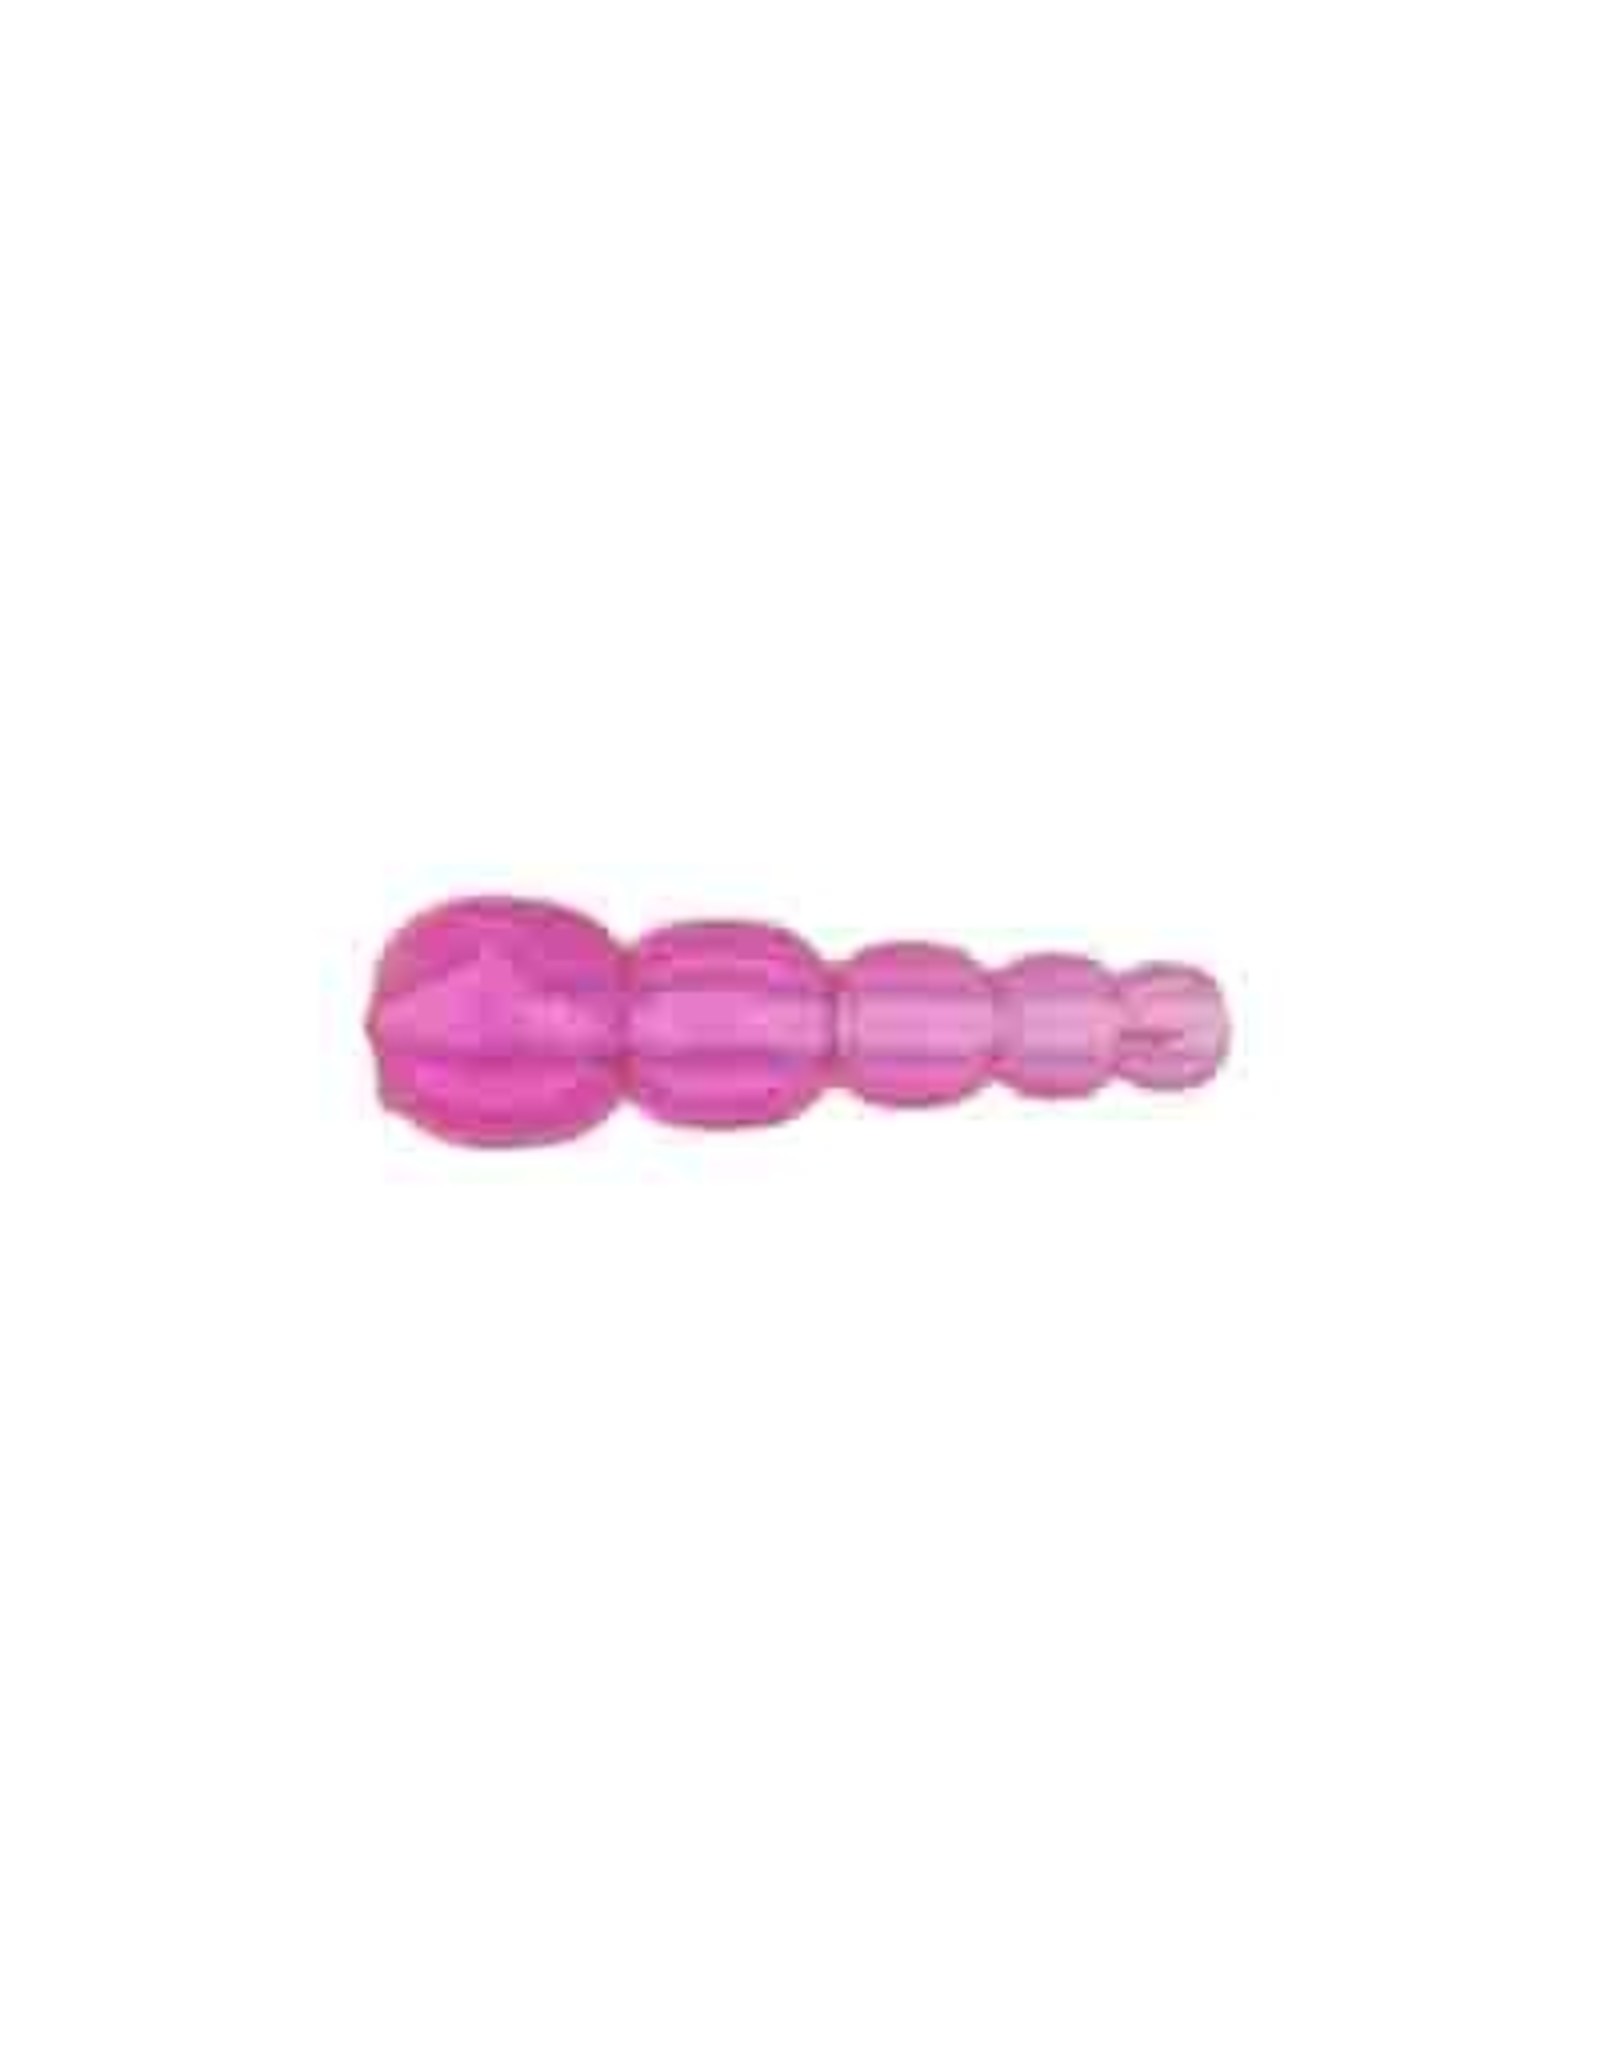 Stacking  20mm Long  approx 6-2mm  Transparent Fuchsia Pink  x25